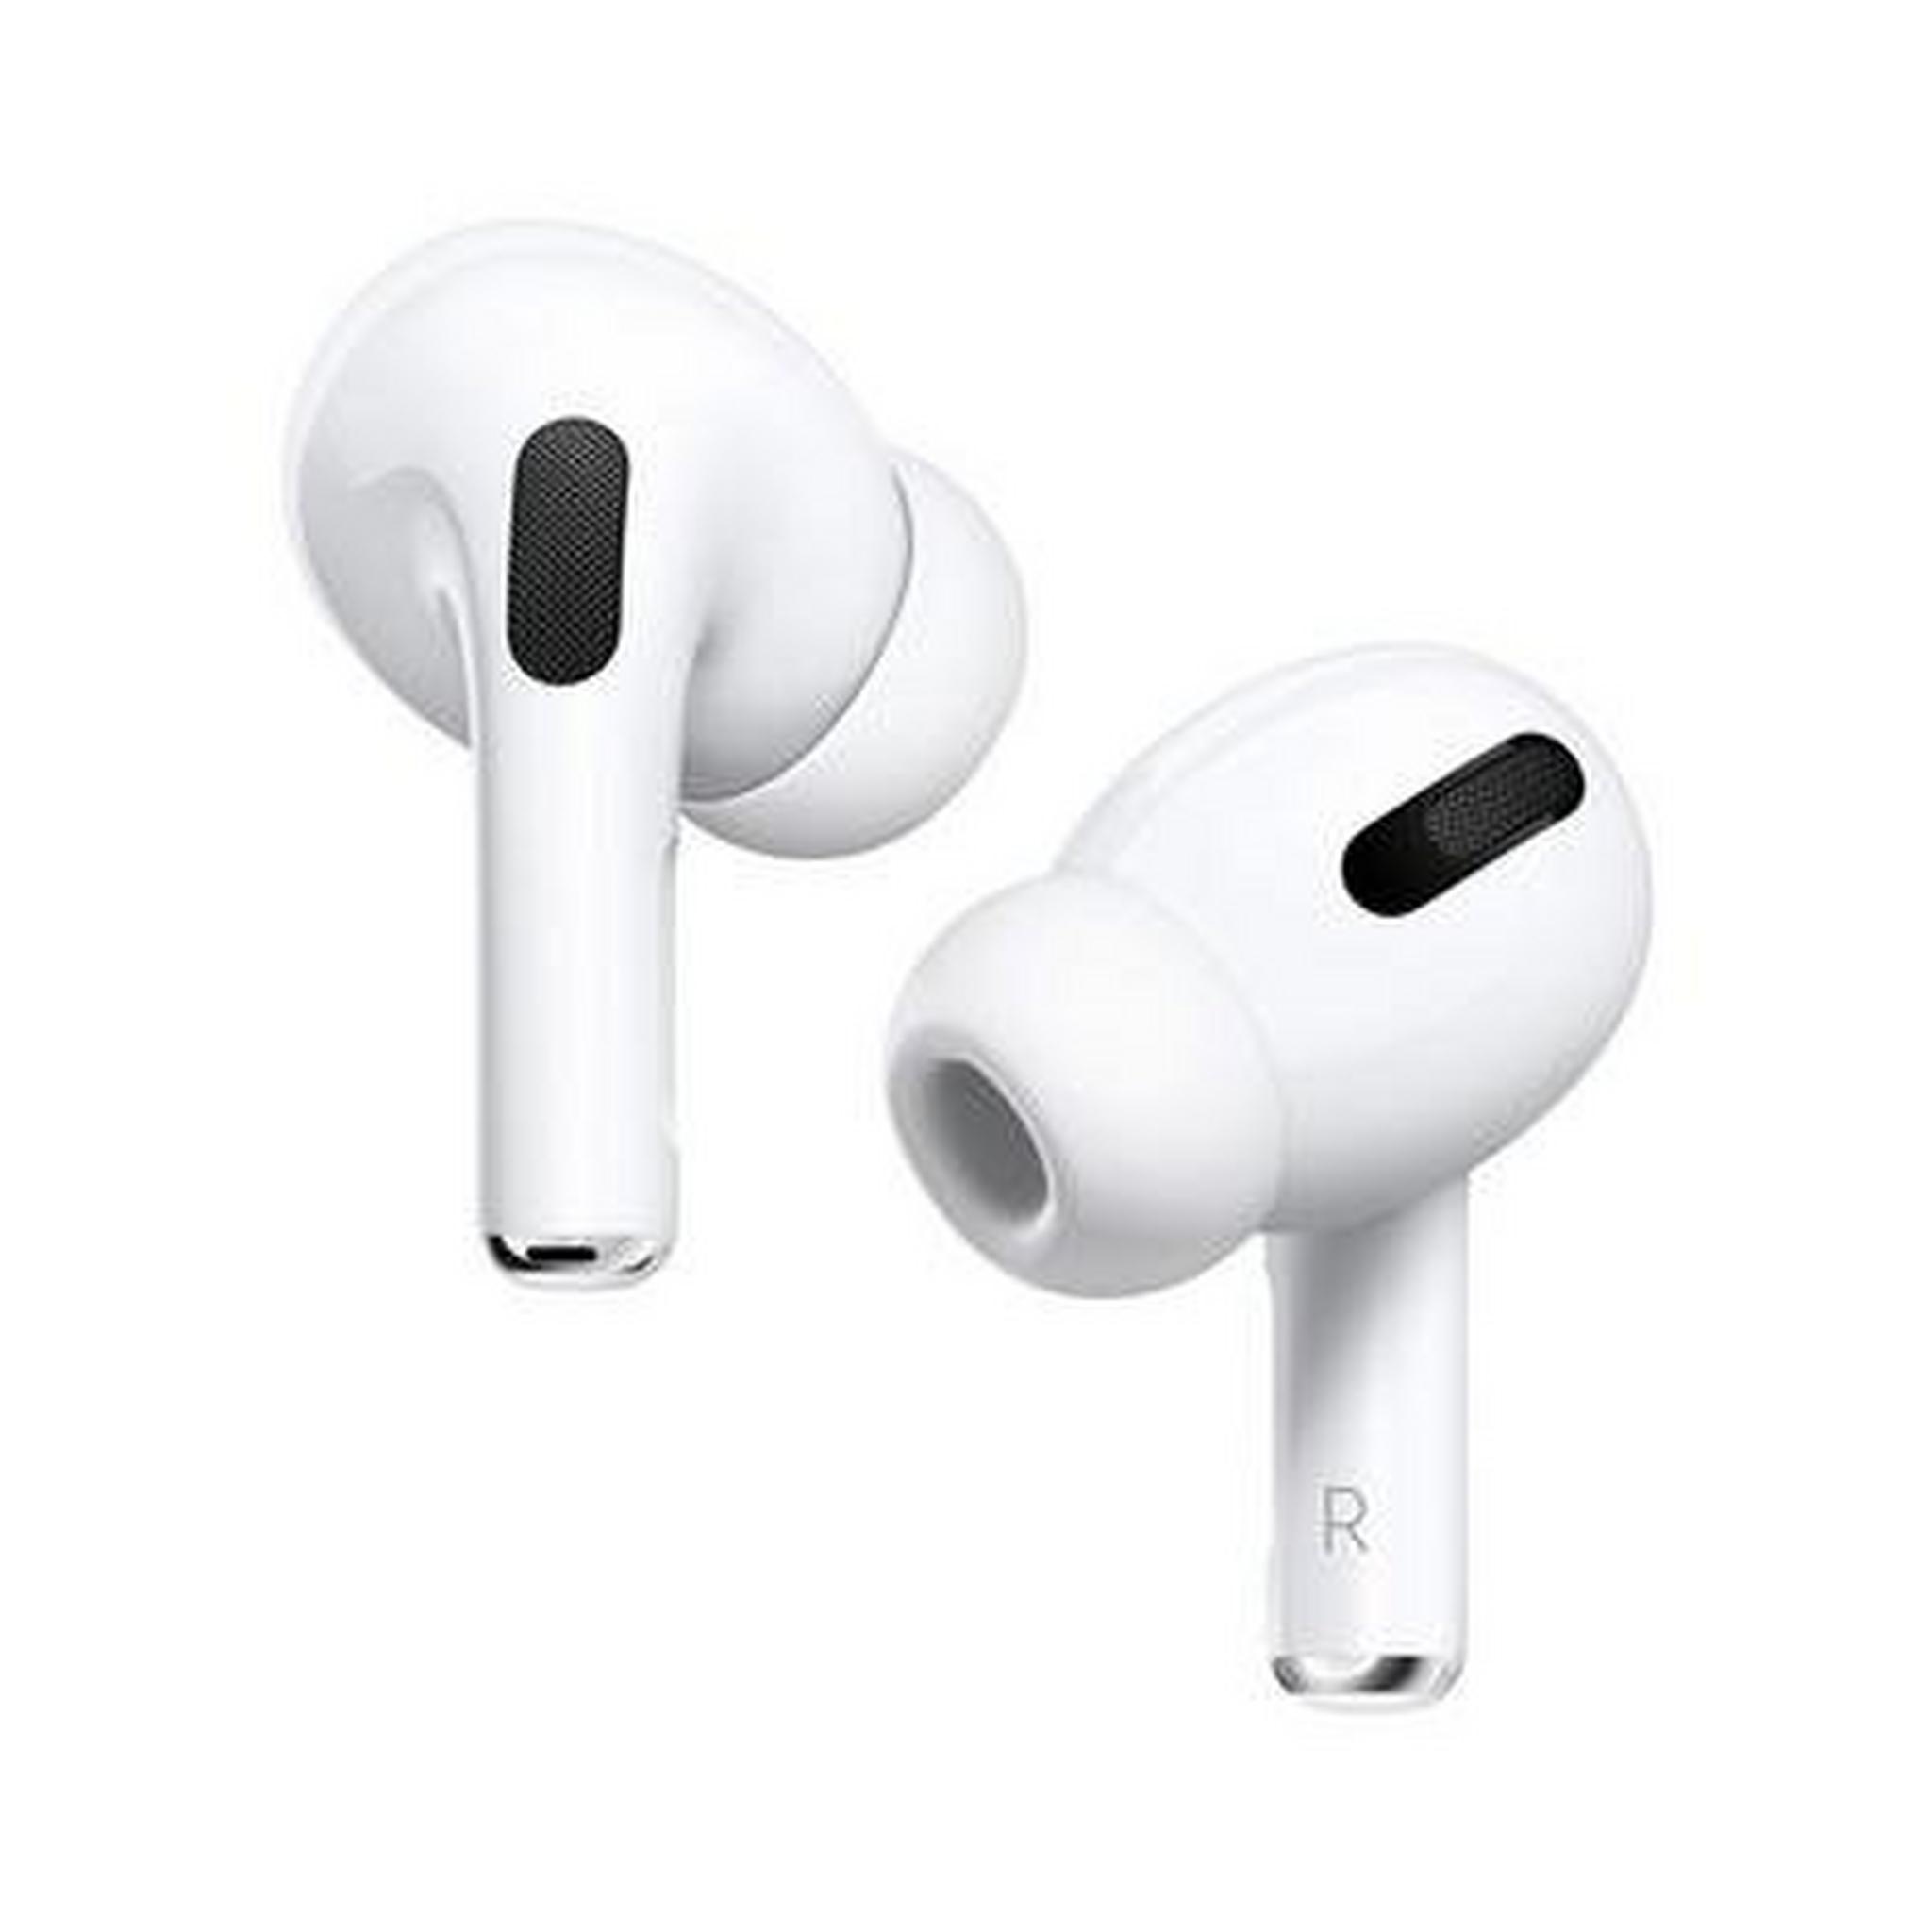 Apple AirPods Pro (2nd generation)with Wireless MagSafe Charging Case, Lighting Port - White